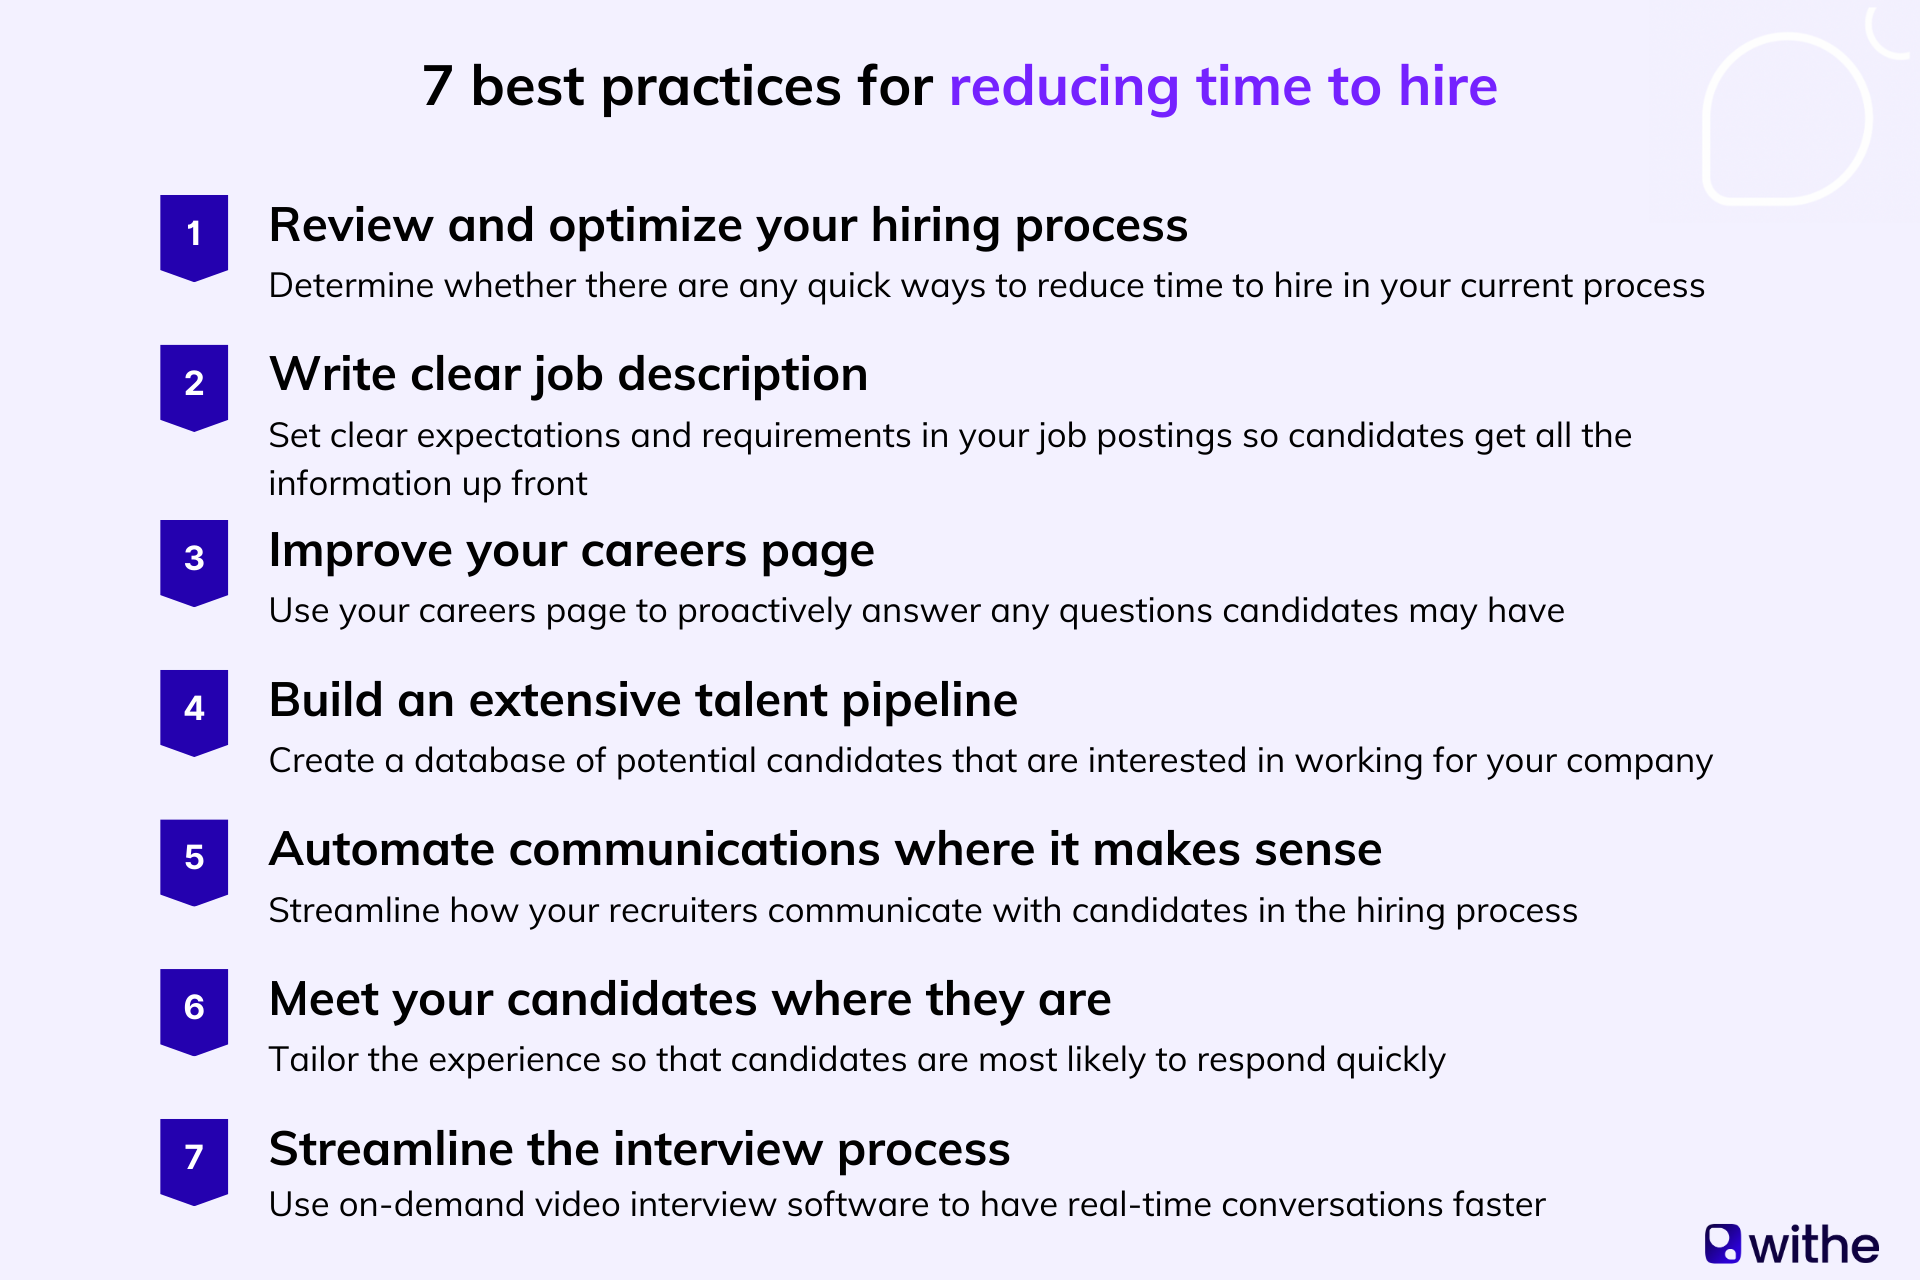 7 best practices for reducing time to hire